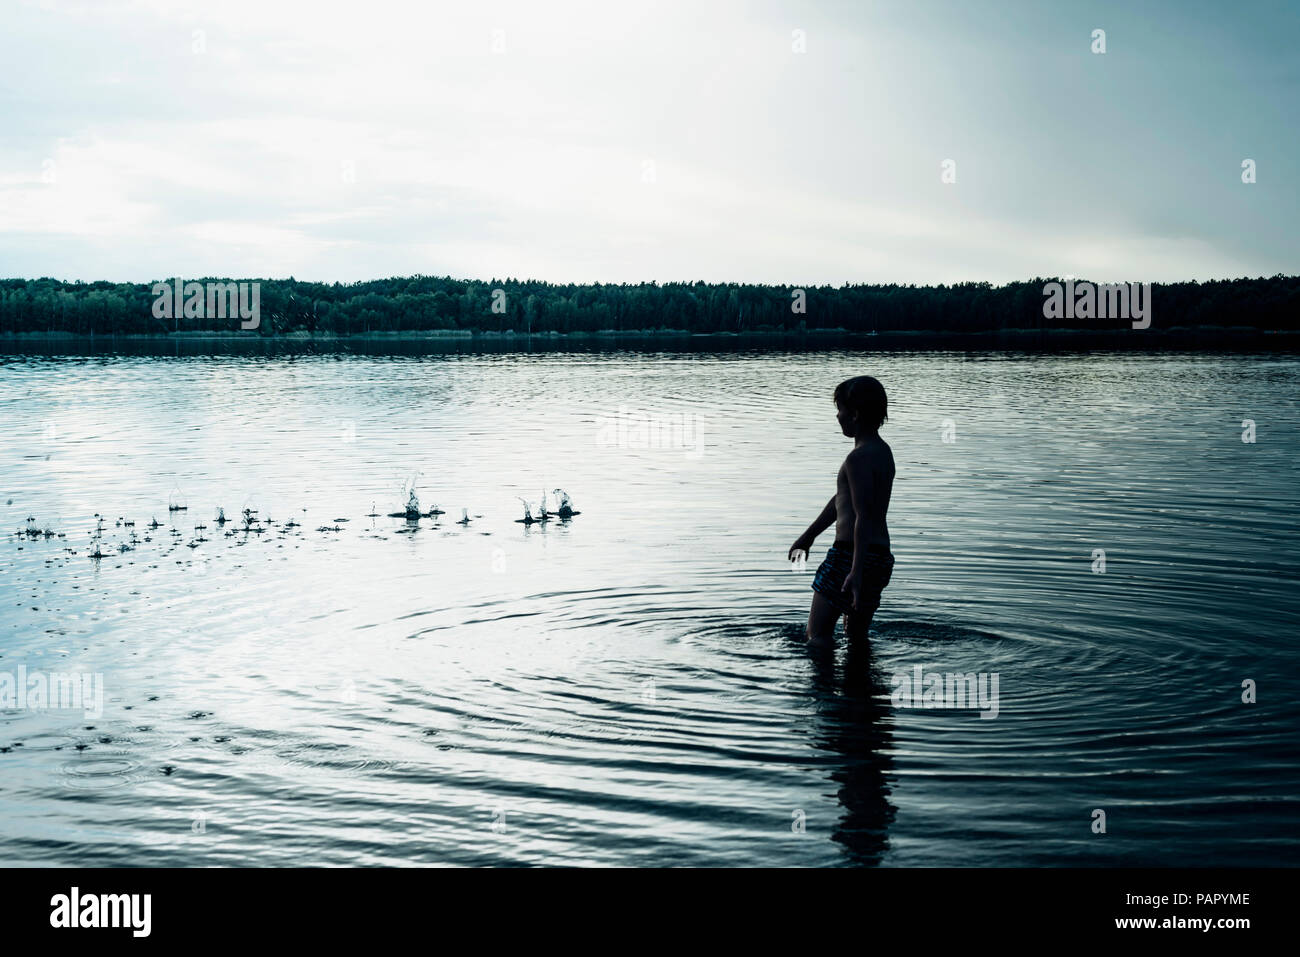 Boy in a lake at dusk Stock Photo